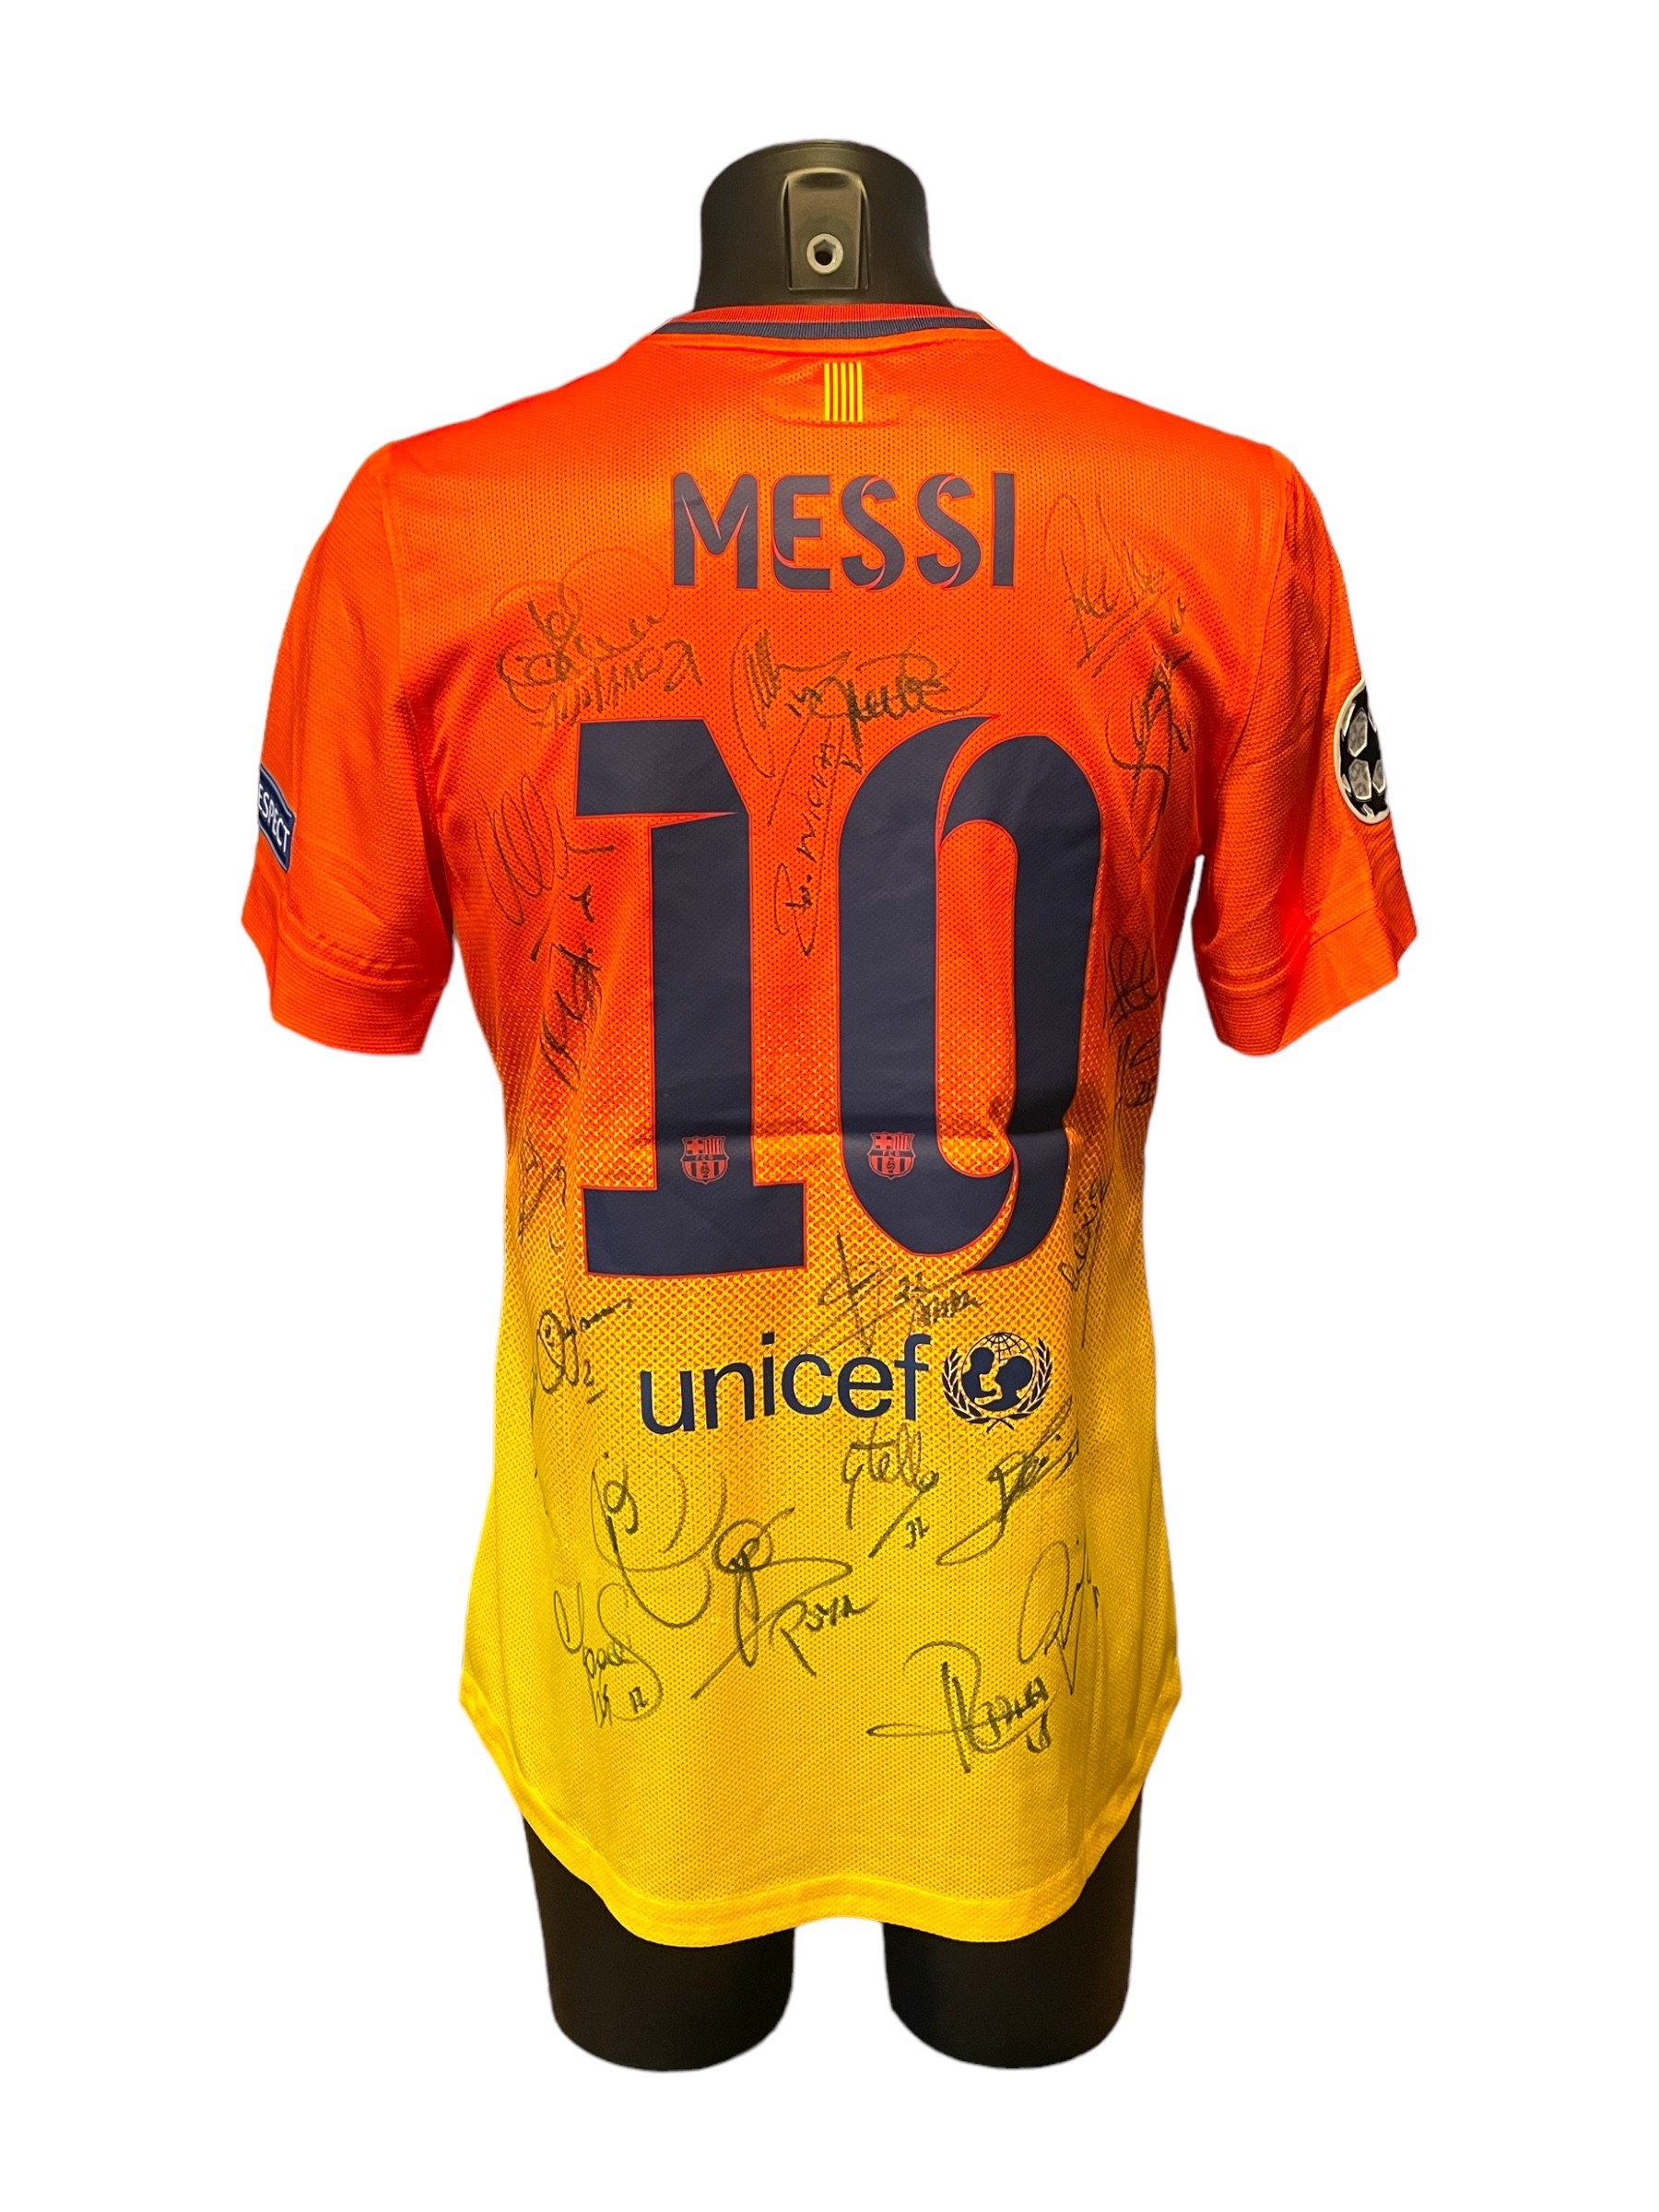 Lionel Messi Signed Nike Barcelona Jersey and 2022 World Cup 